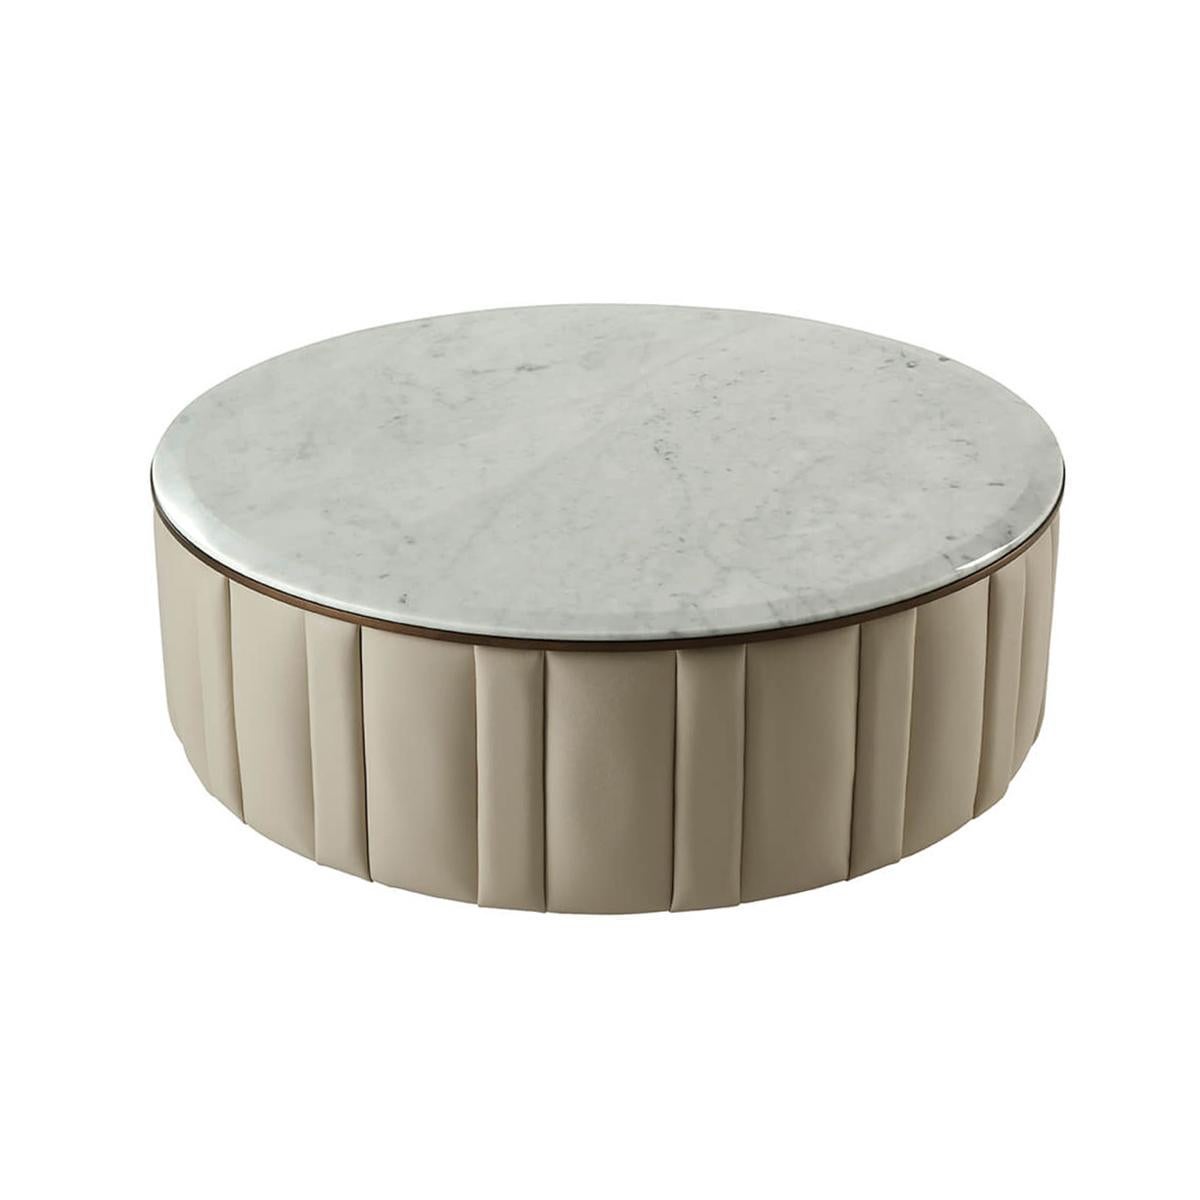 With a round Bianco Carrara marble top with a beveled edge, with leather upholstered sides in a channeled design with Heritage Bronze finish molding.
Dimensions: 47.25